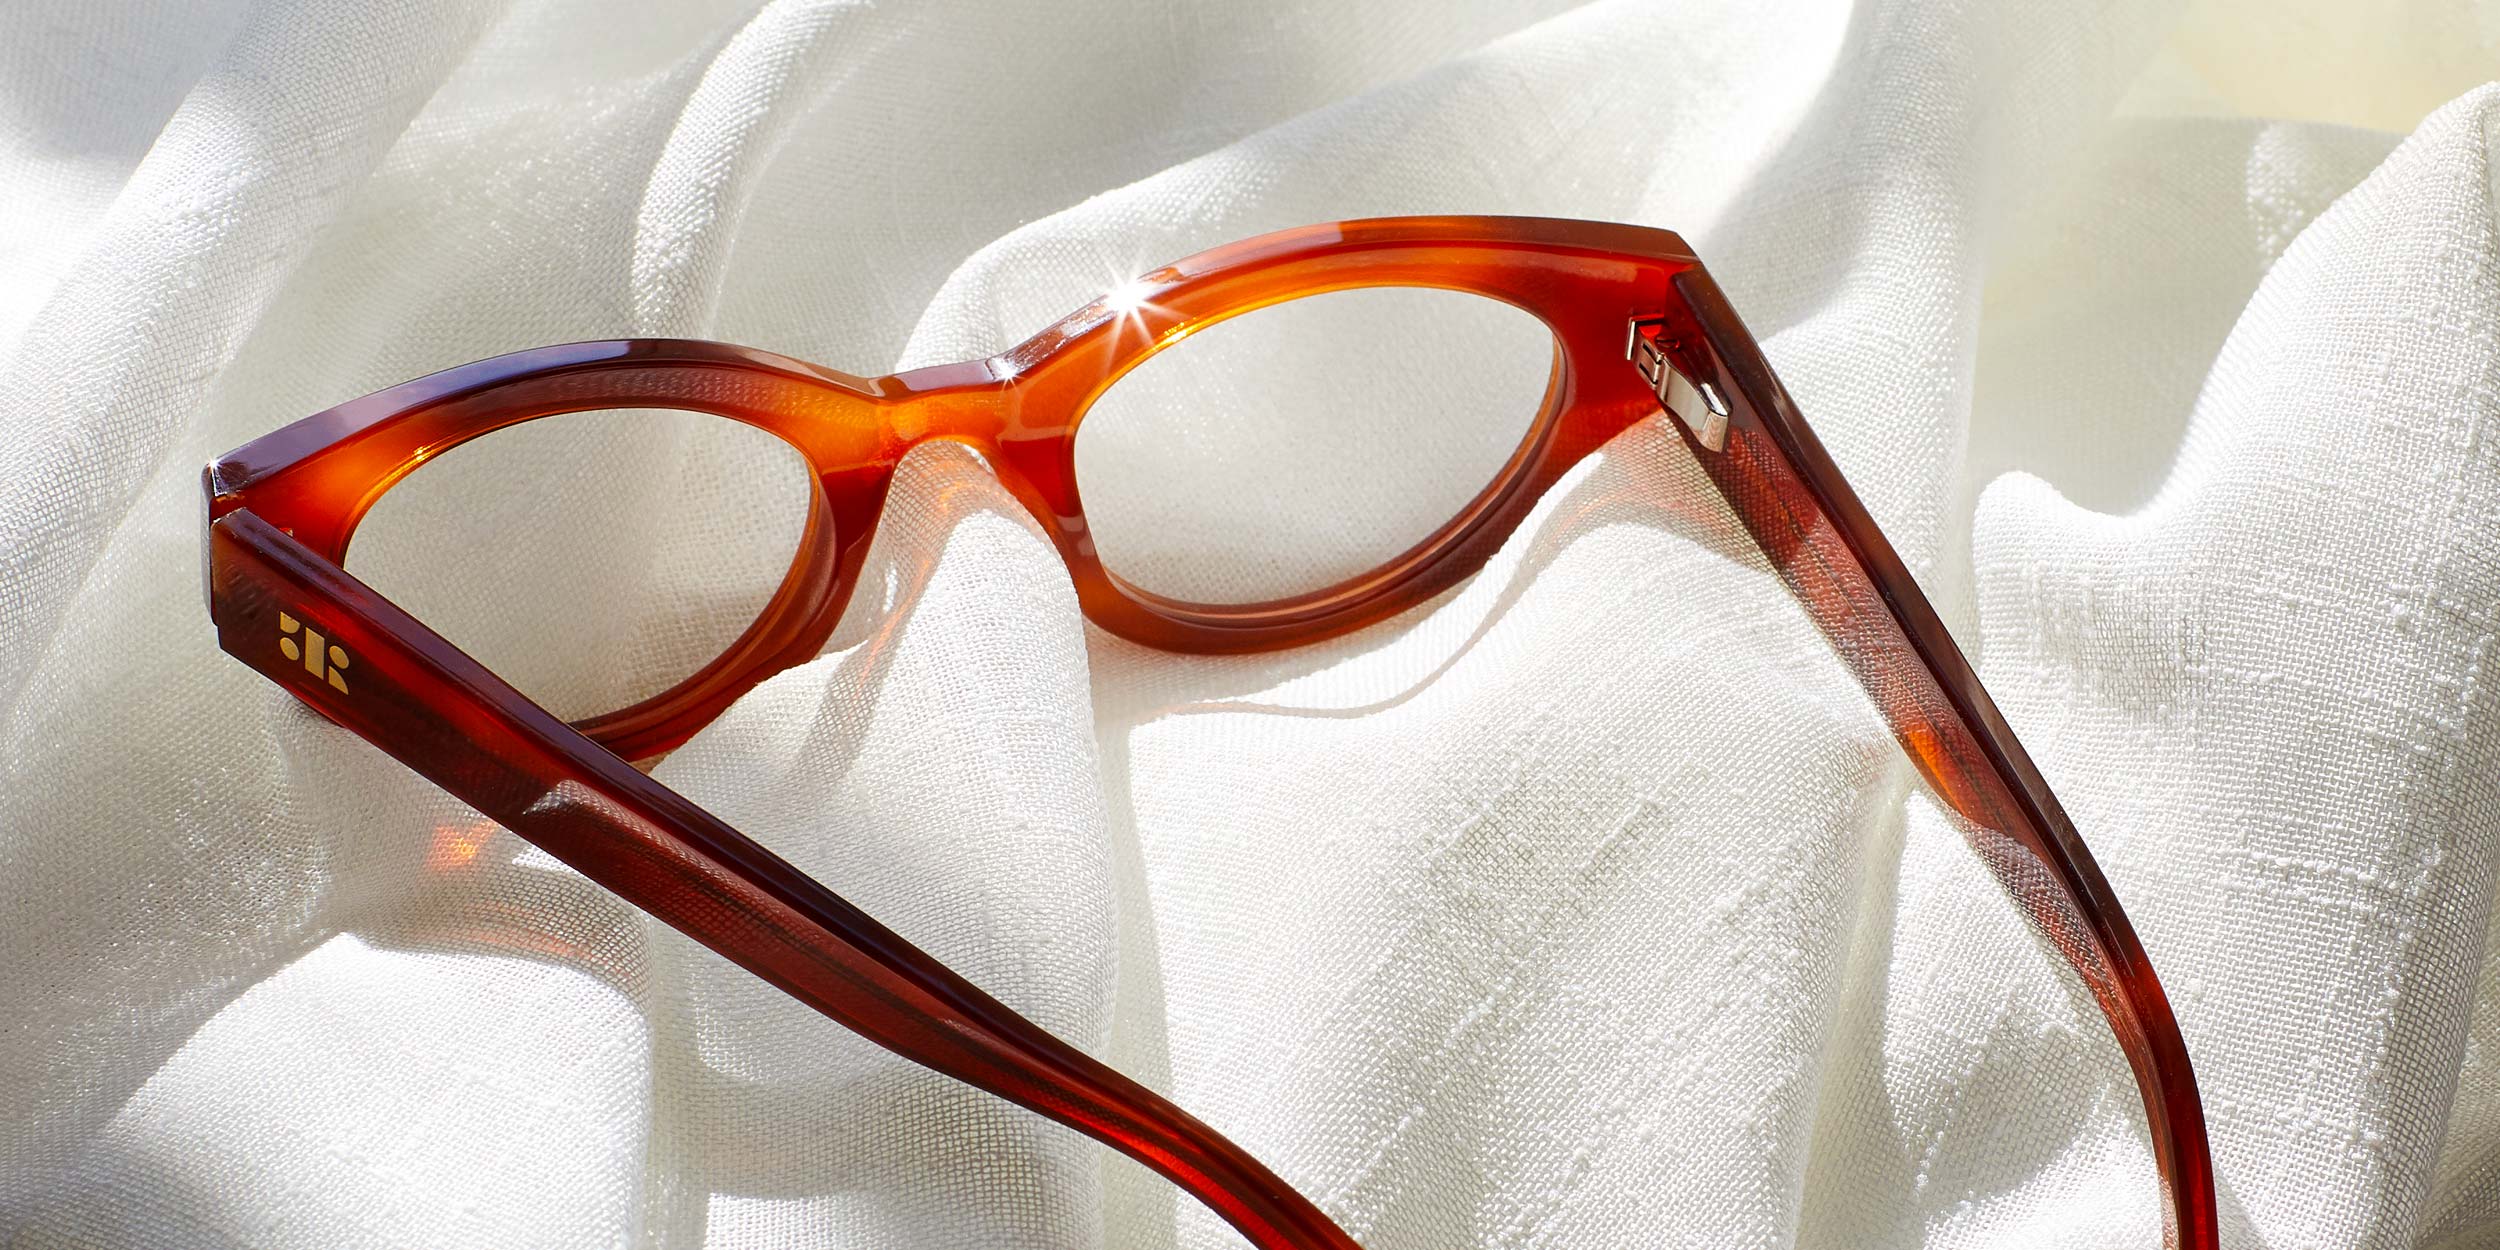 Photo Details of Camille Creme Reading Glasses in a room